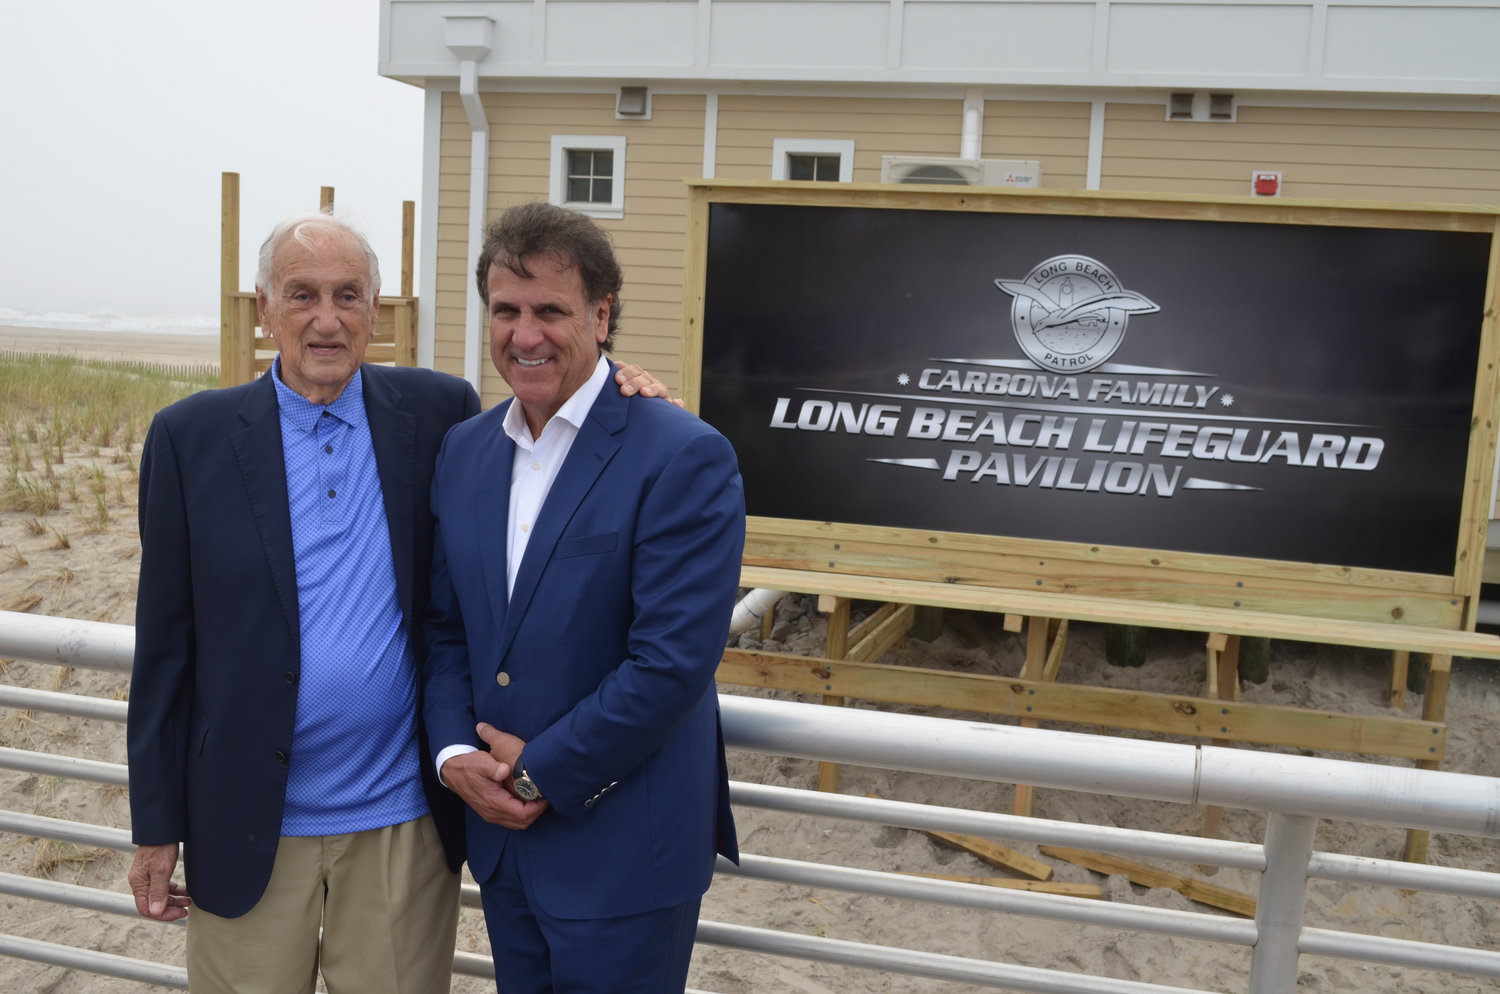 New lifeguard pavilion named for Carbona, Herald Community Newspapers